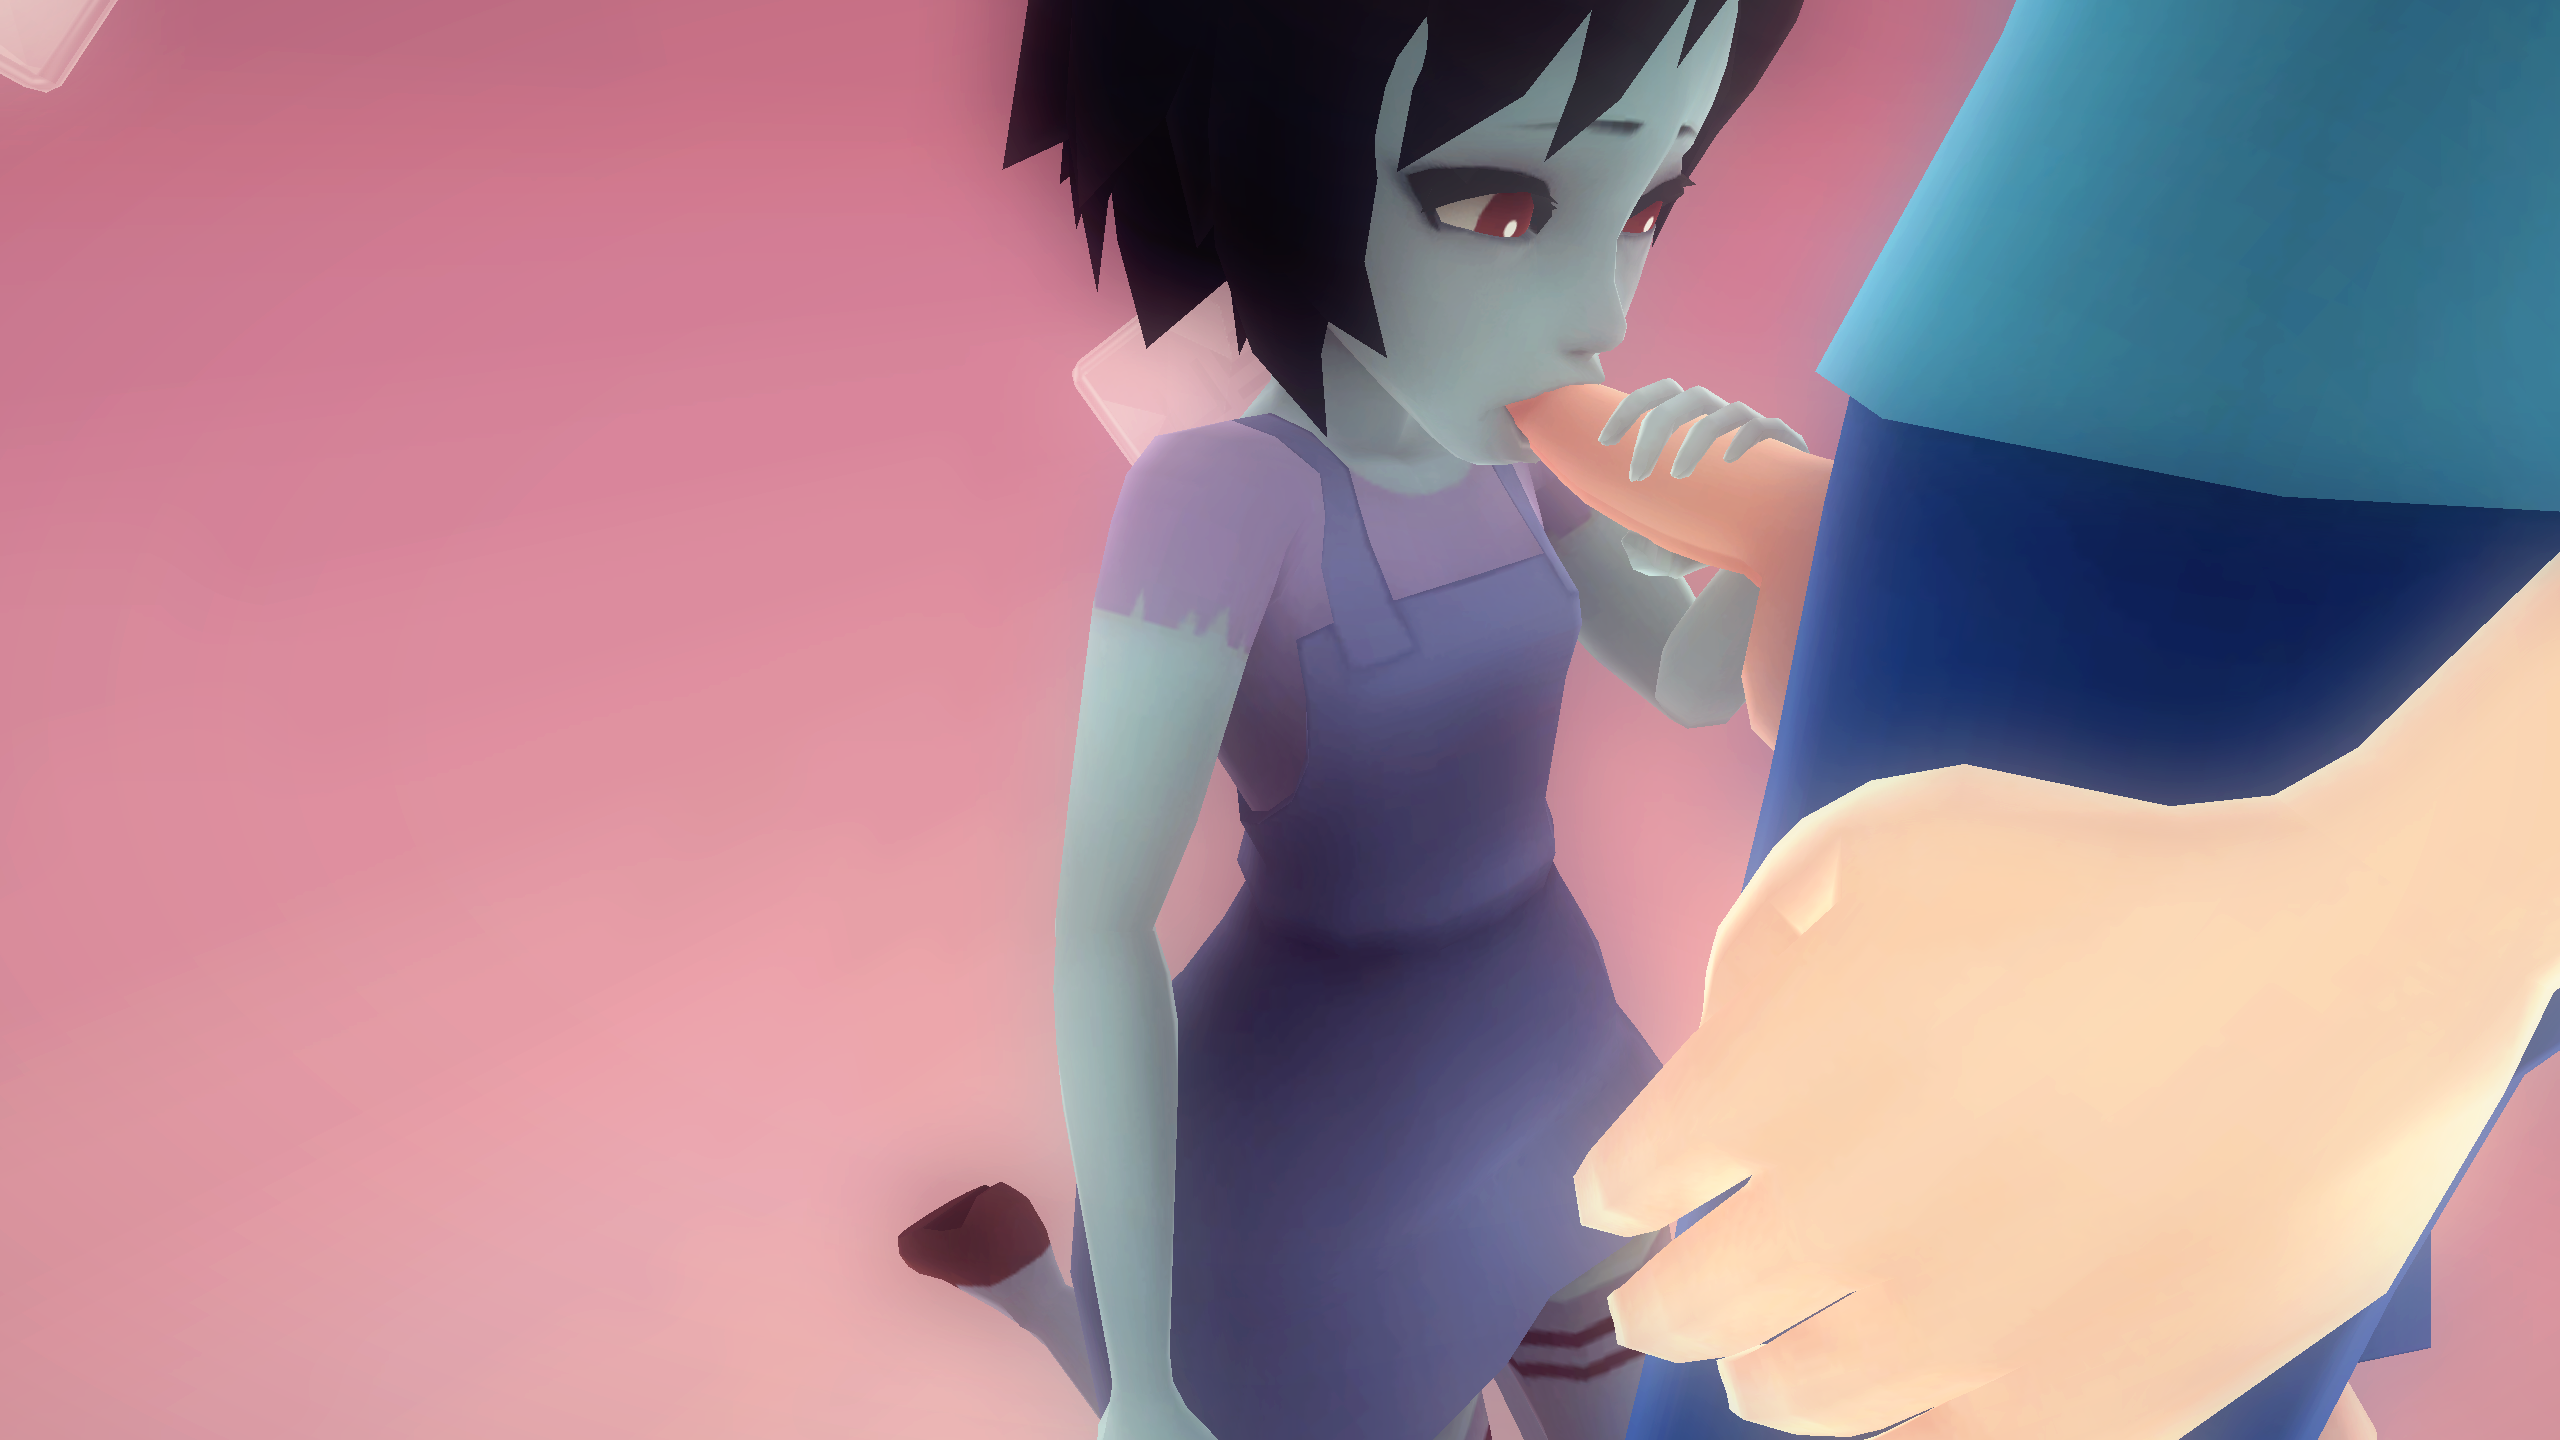 2560px x 1440px - Post 3761718: Adventure_Time Finn_the_Human Marceline  what_if_adventure_time_was_a_3D_anime_game